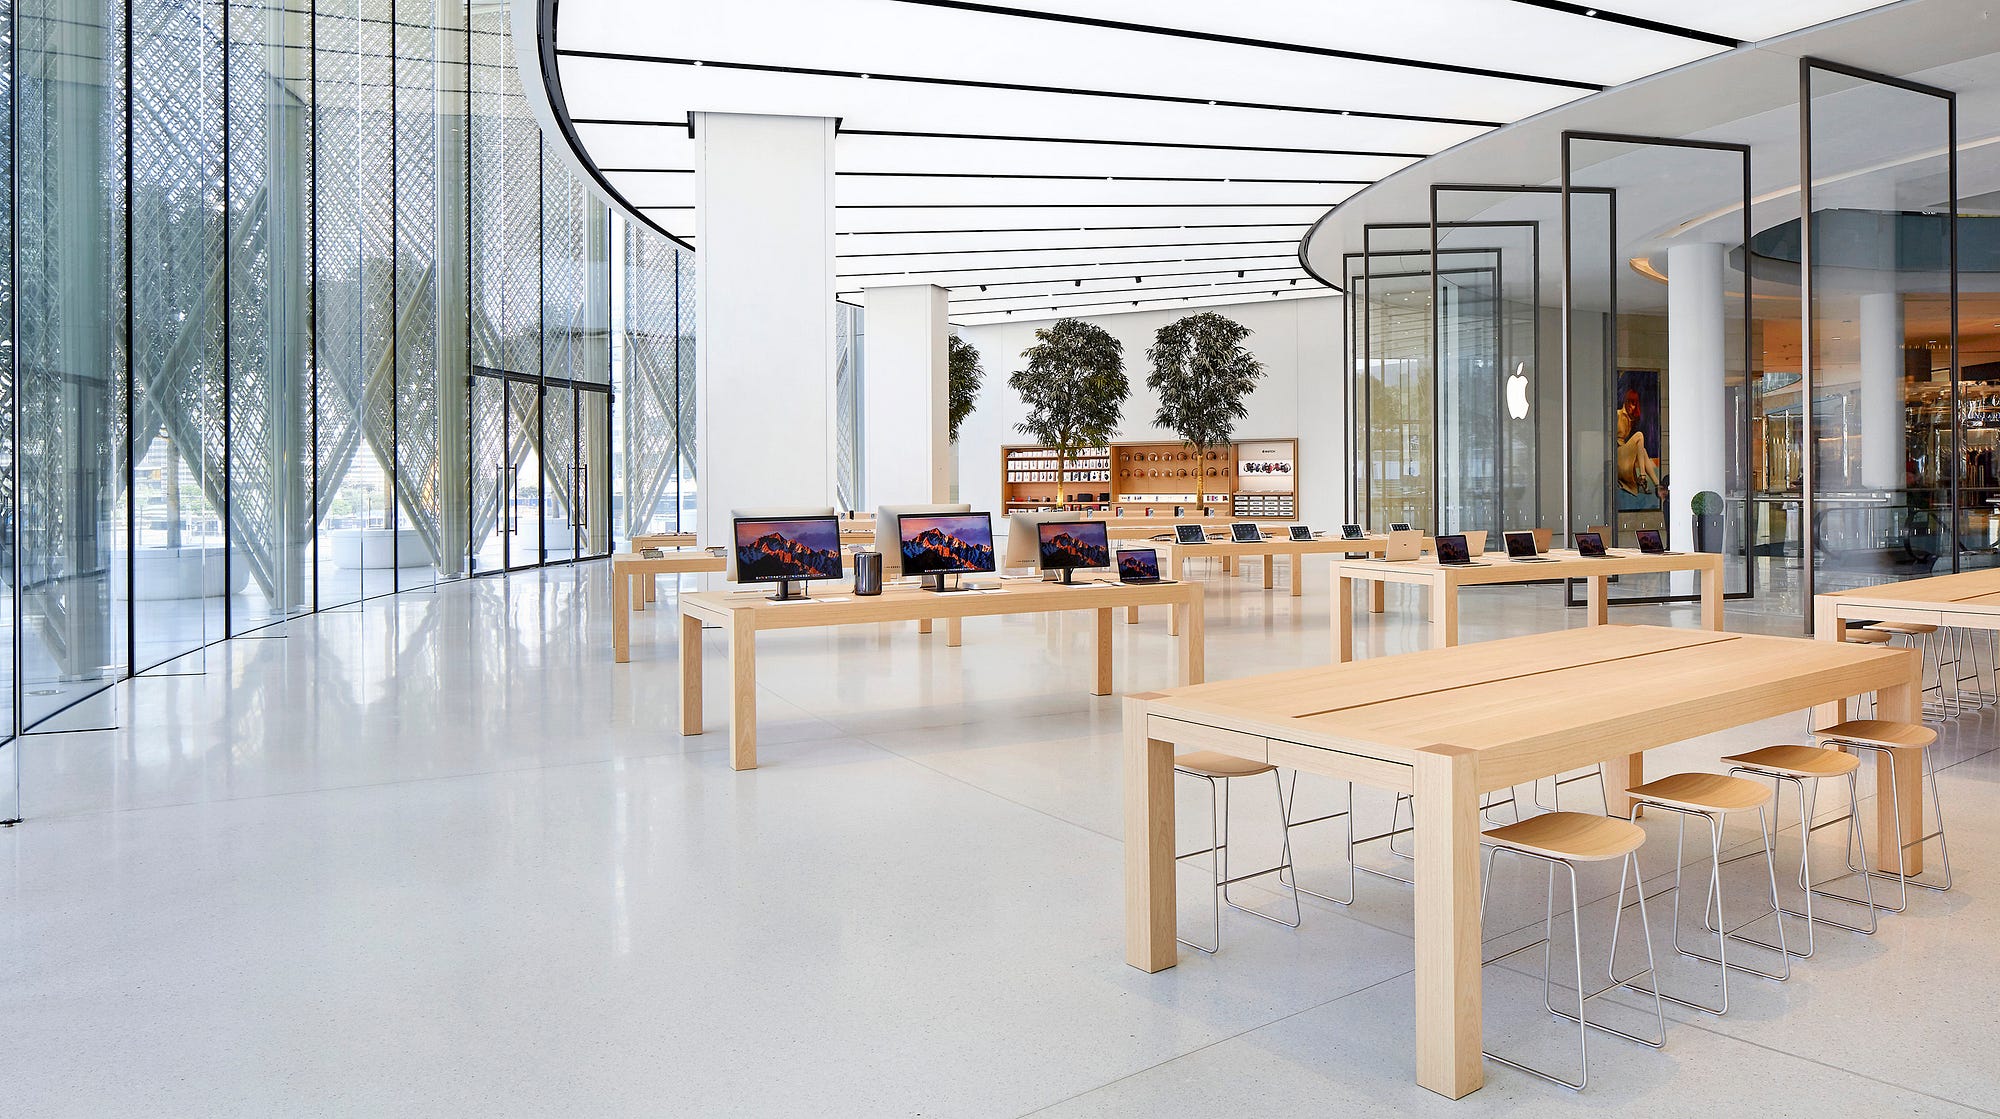 Exploring 5 Iconic Apple Store Locations, by Apple Byte